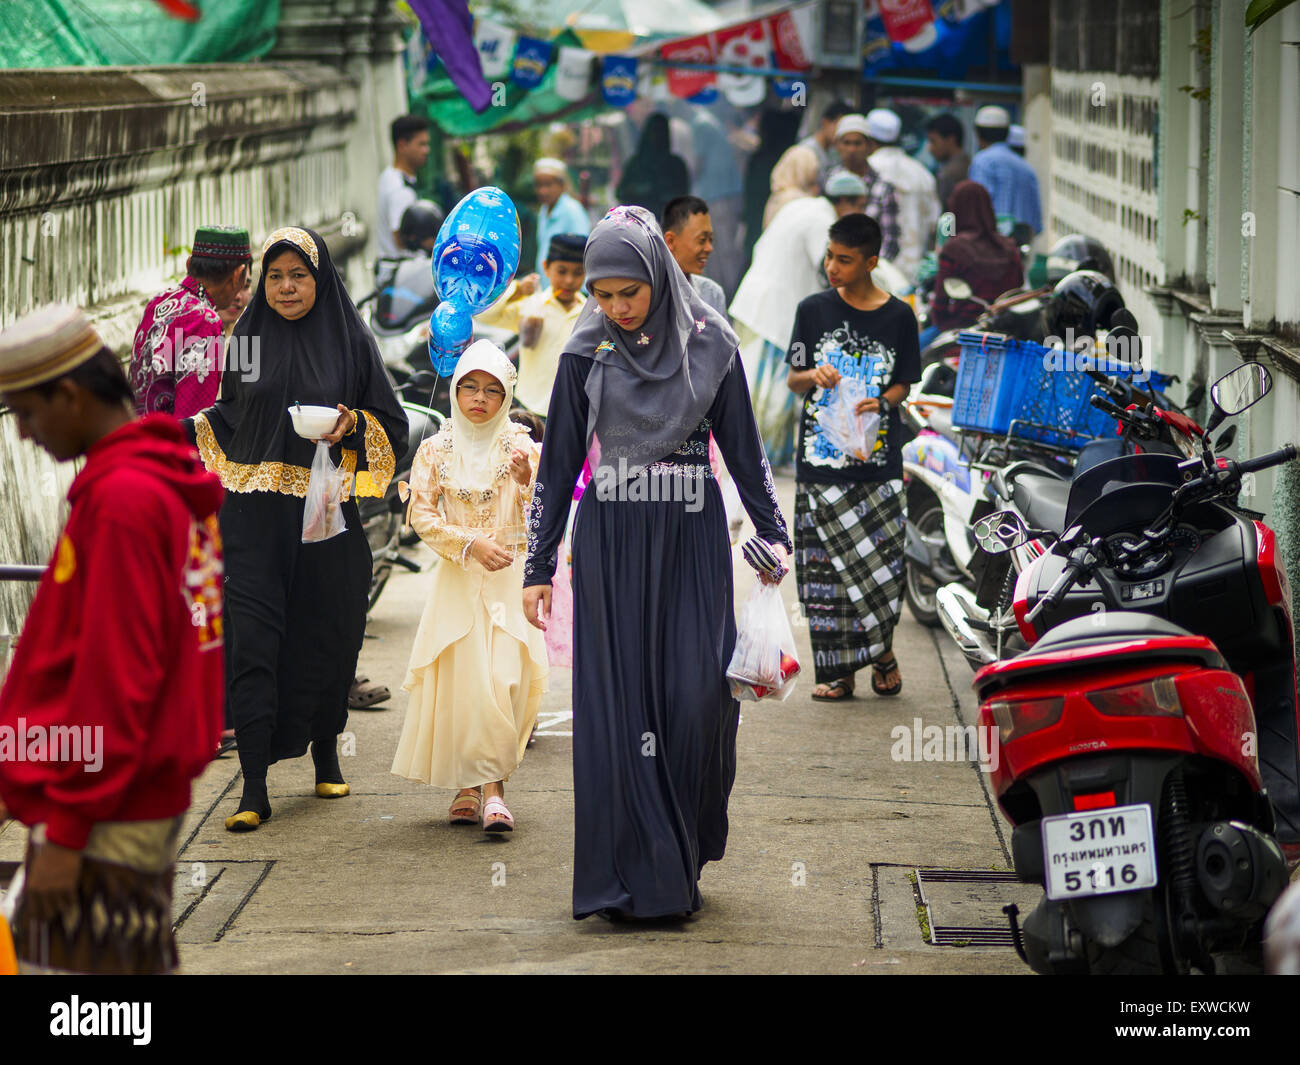 Bangkok, Thailand. 17th July, 2015. People walk in front of Ton Son Mosque in Bangkok after Eid services. Eid al-Fitr is also called Feast of Breaking the Fast, the Sugar Feast, Bayram (Bajram), the Sweet Festival or Hari Raya Puasa and the Lesser Eid. It is an important Muslim religious holiday that marks the end of Ramadan, the Islamic holy month of fasting. Muslims are not allowed to fast on Eid. Credit:  ZUMA Press, Inc./Alamy Live News Stock Photo